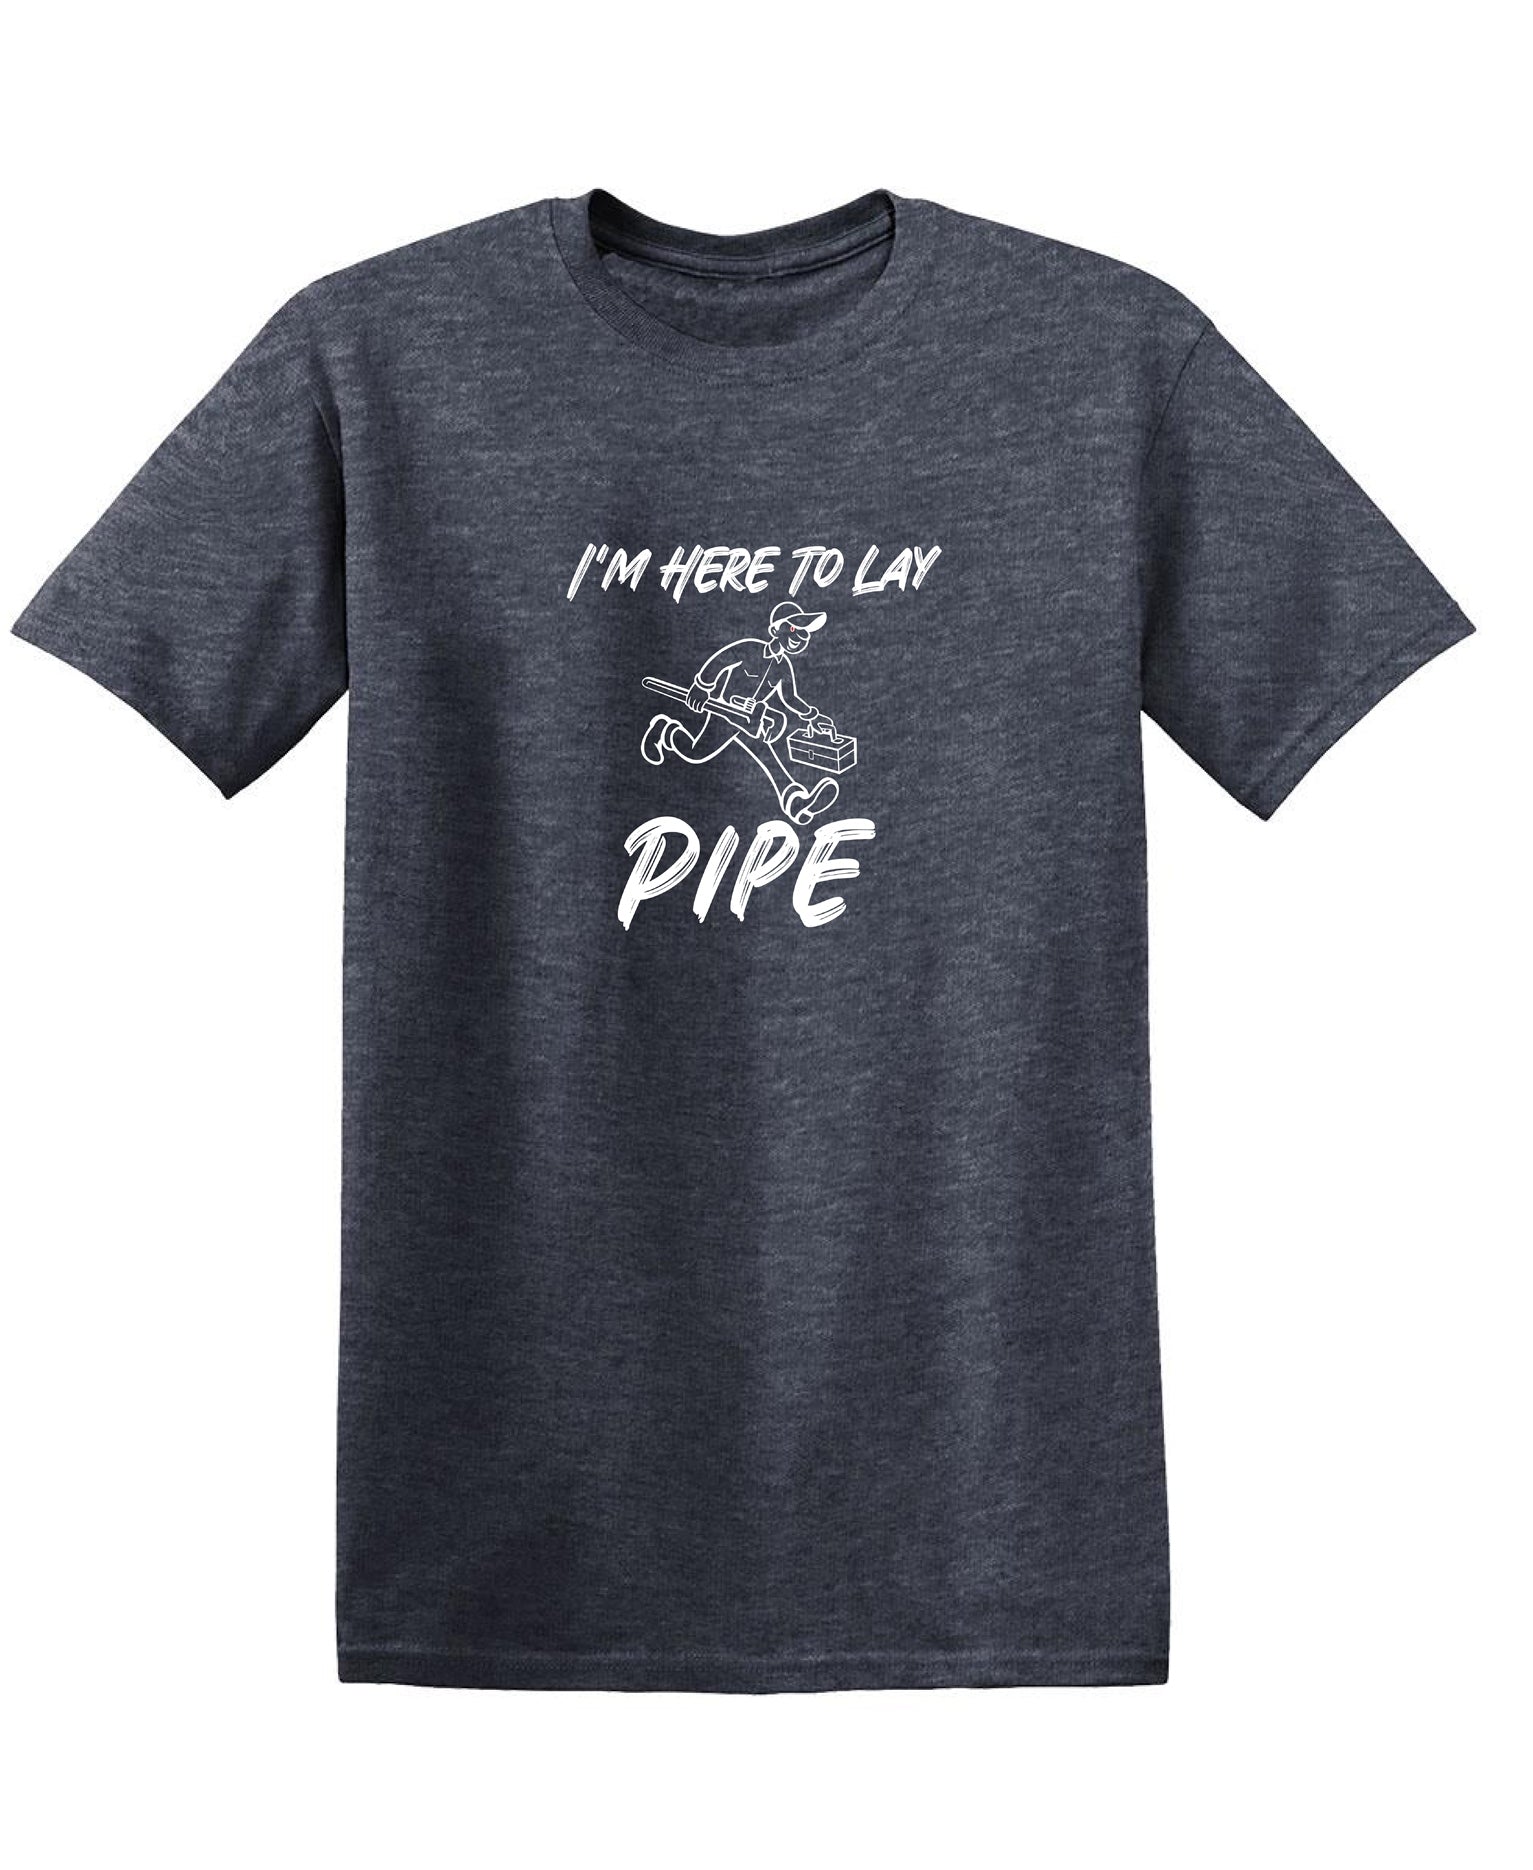 I'm Here To Lay Pipe - Funny T Shirts & Graphic Tees